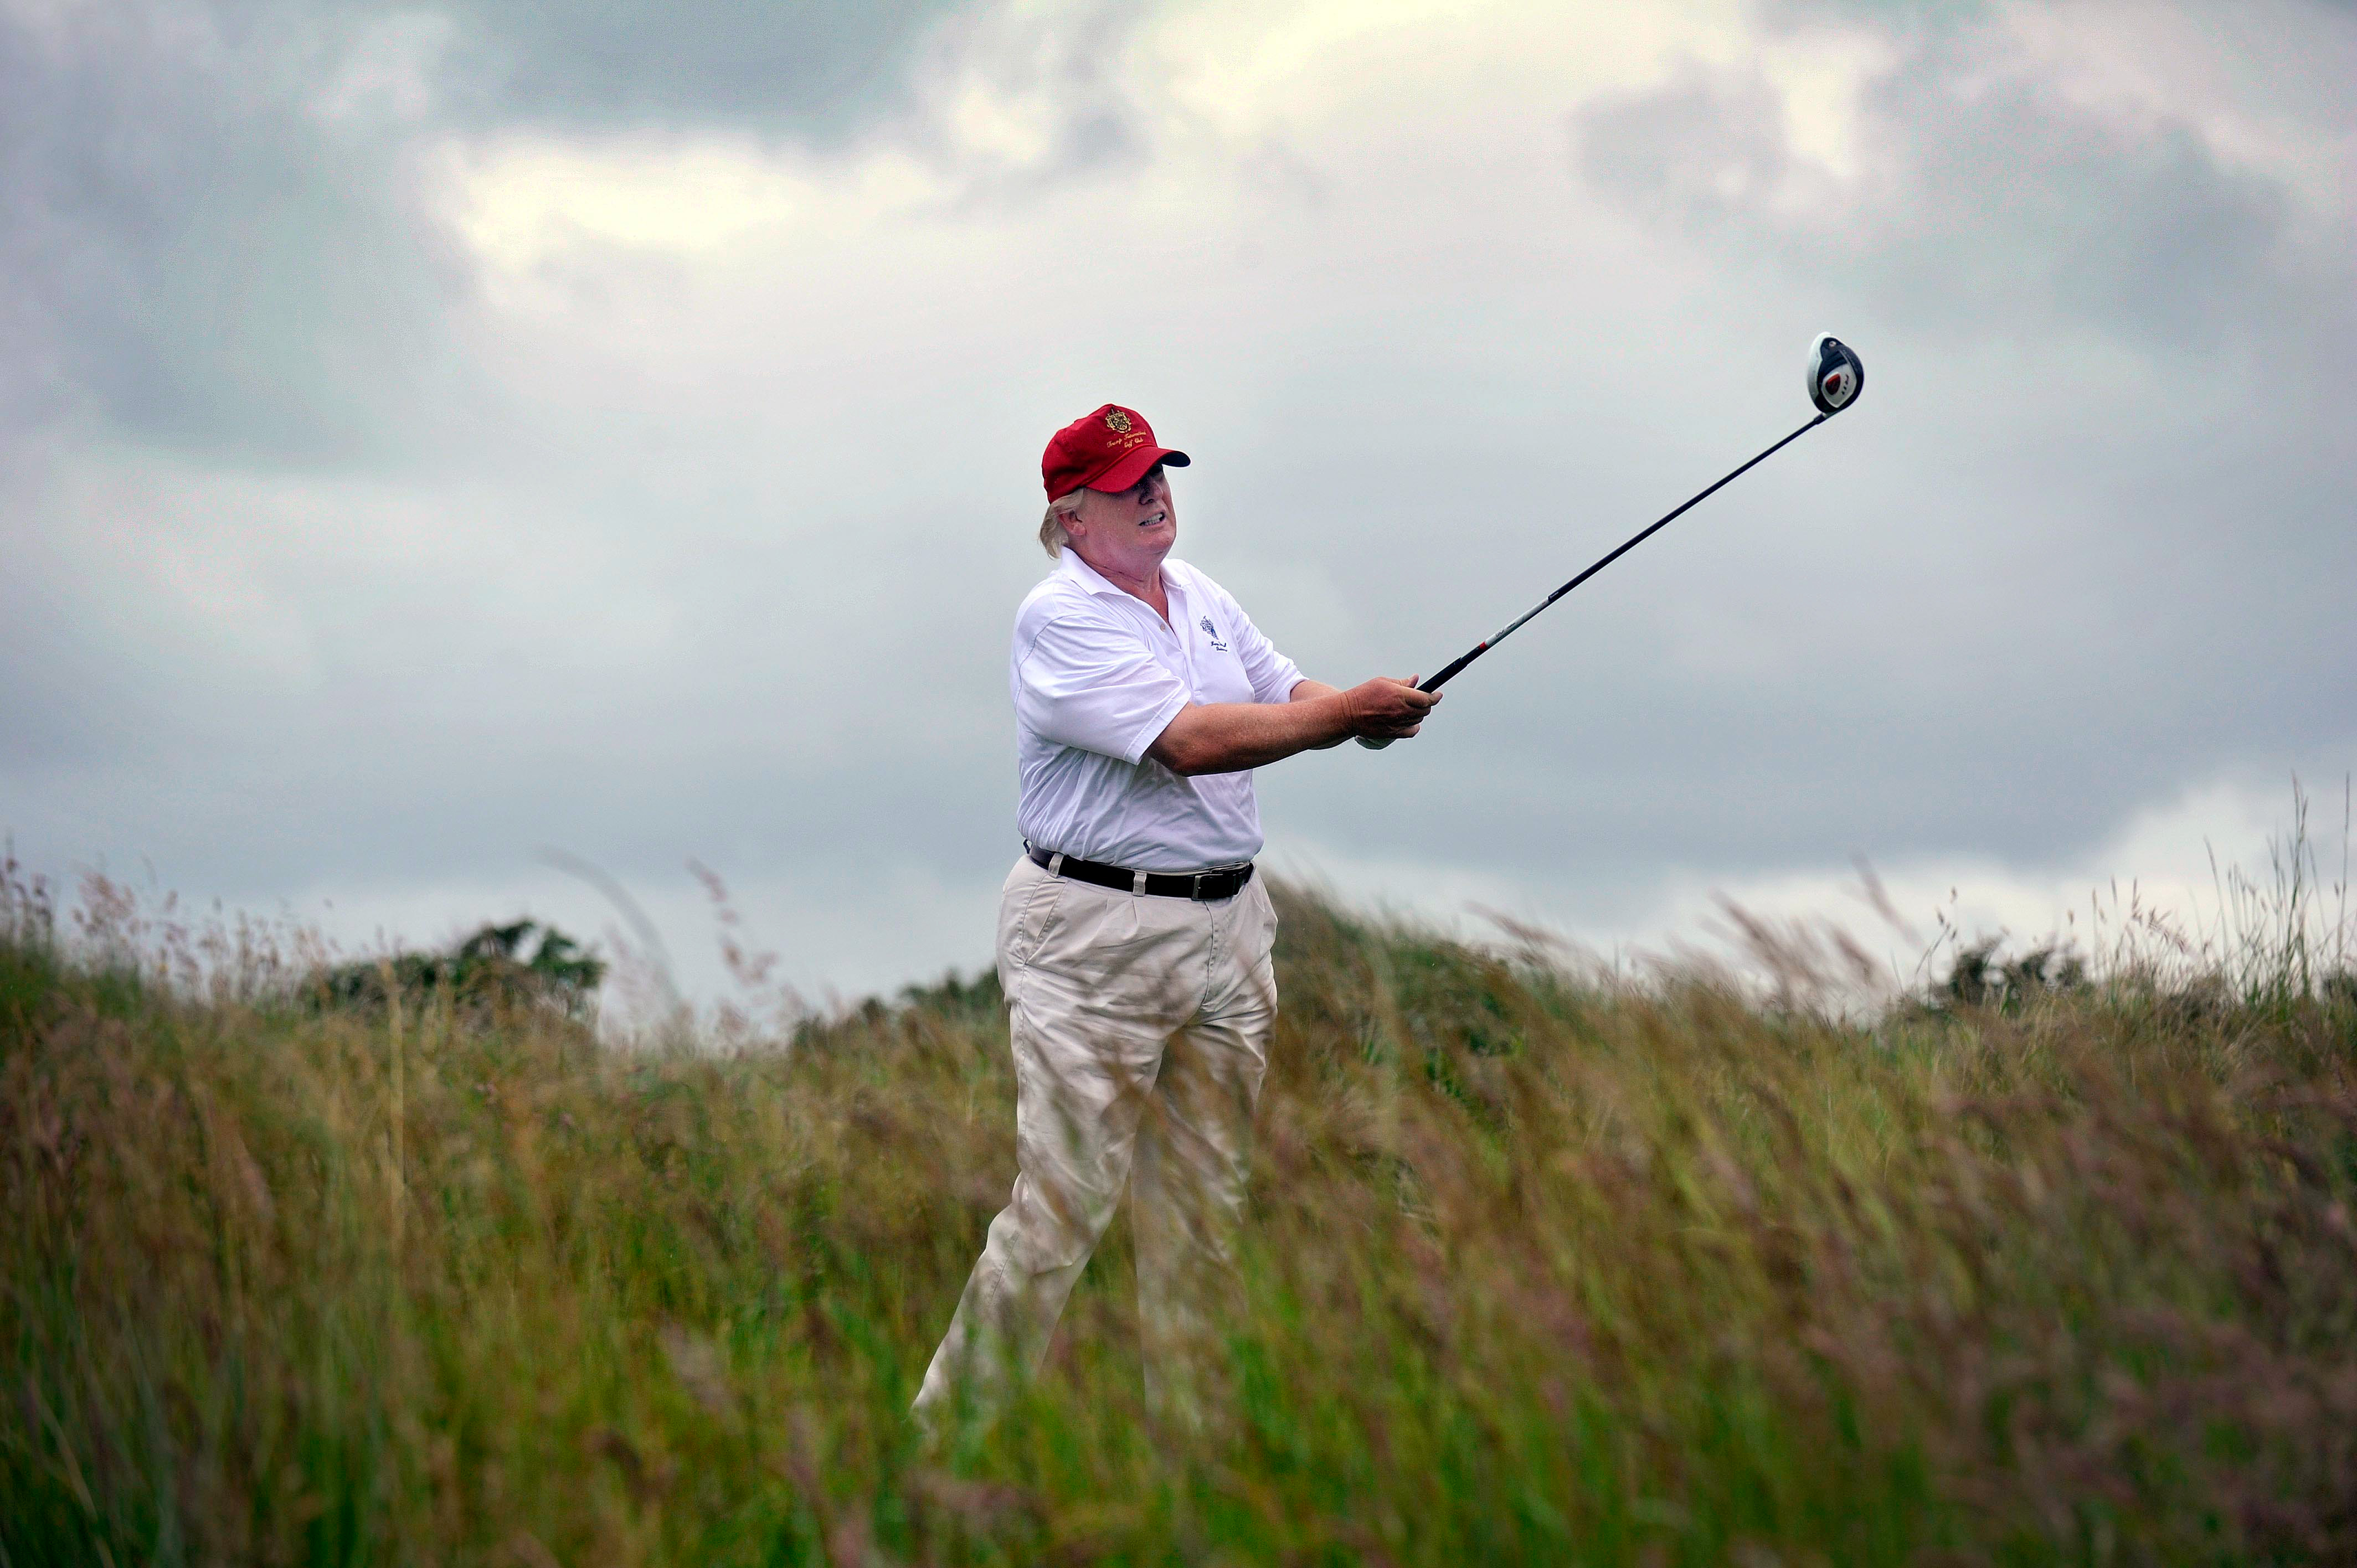 Donald Trump is a little bit good at golf, here's proof...